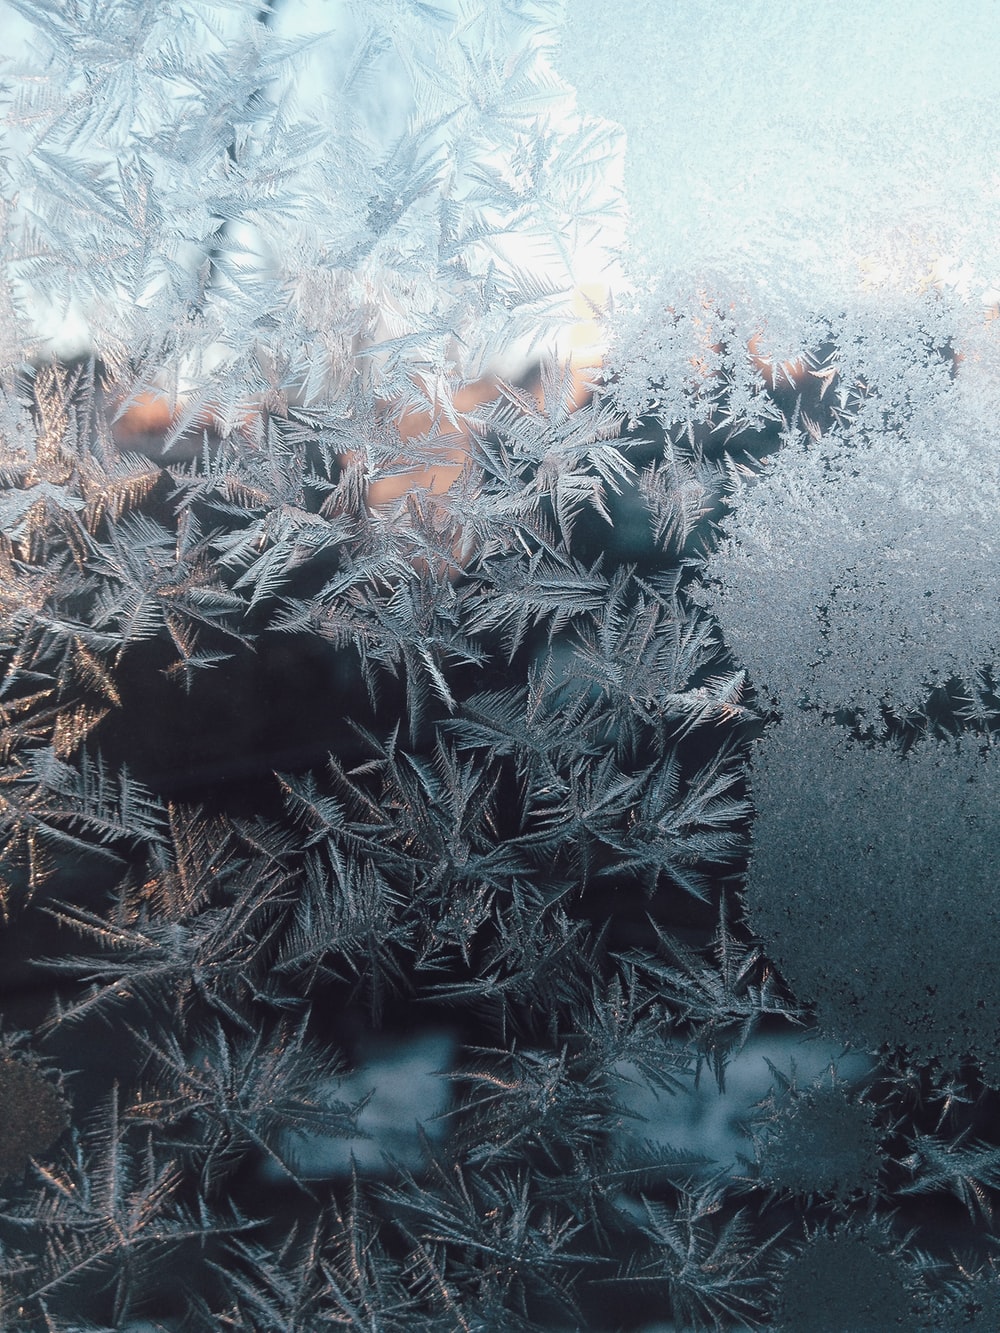 Winter Ice Picture. Download Free Image